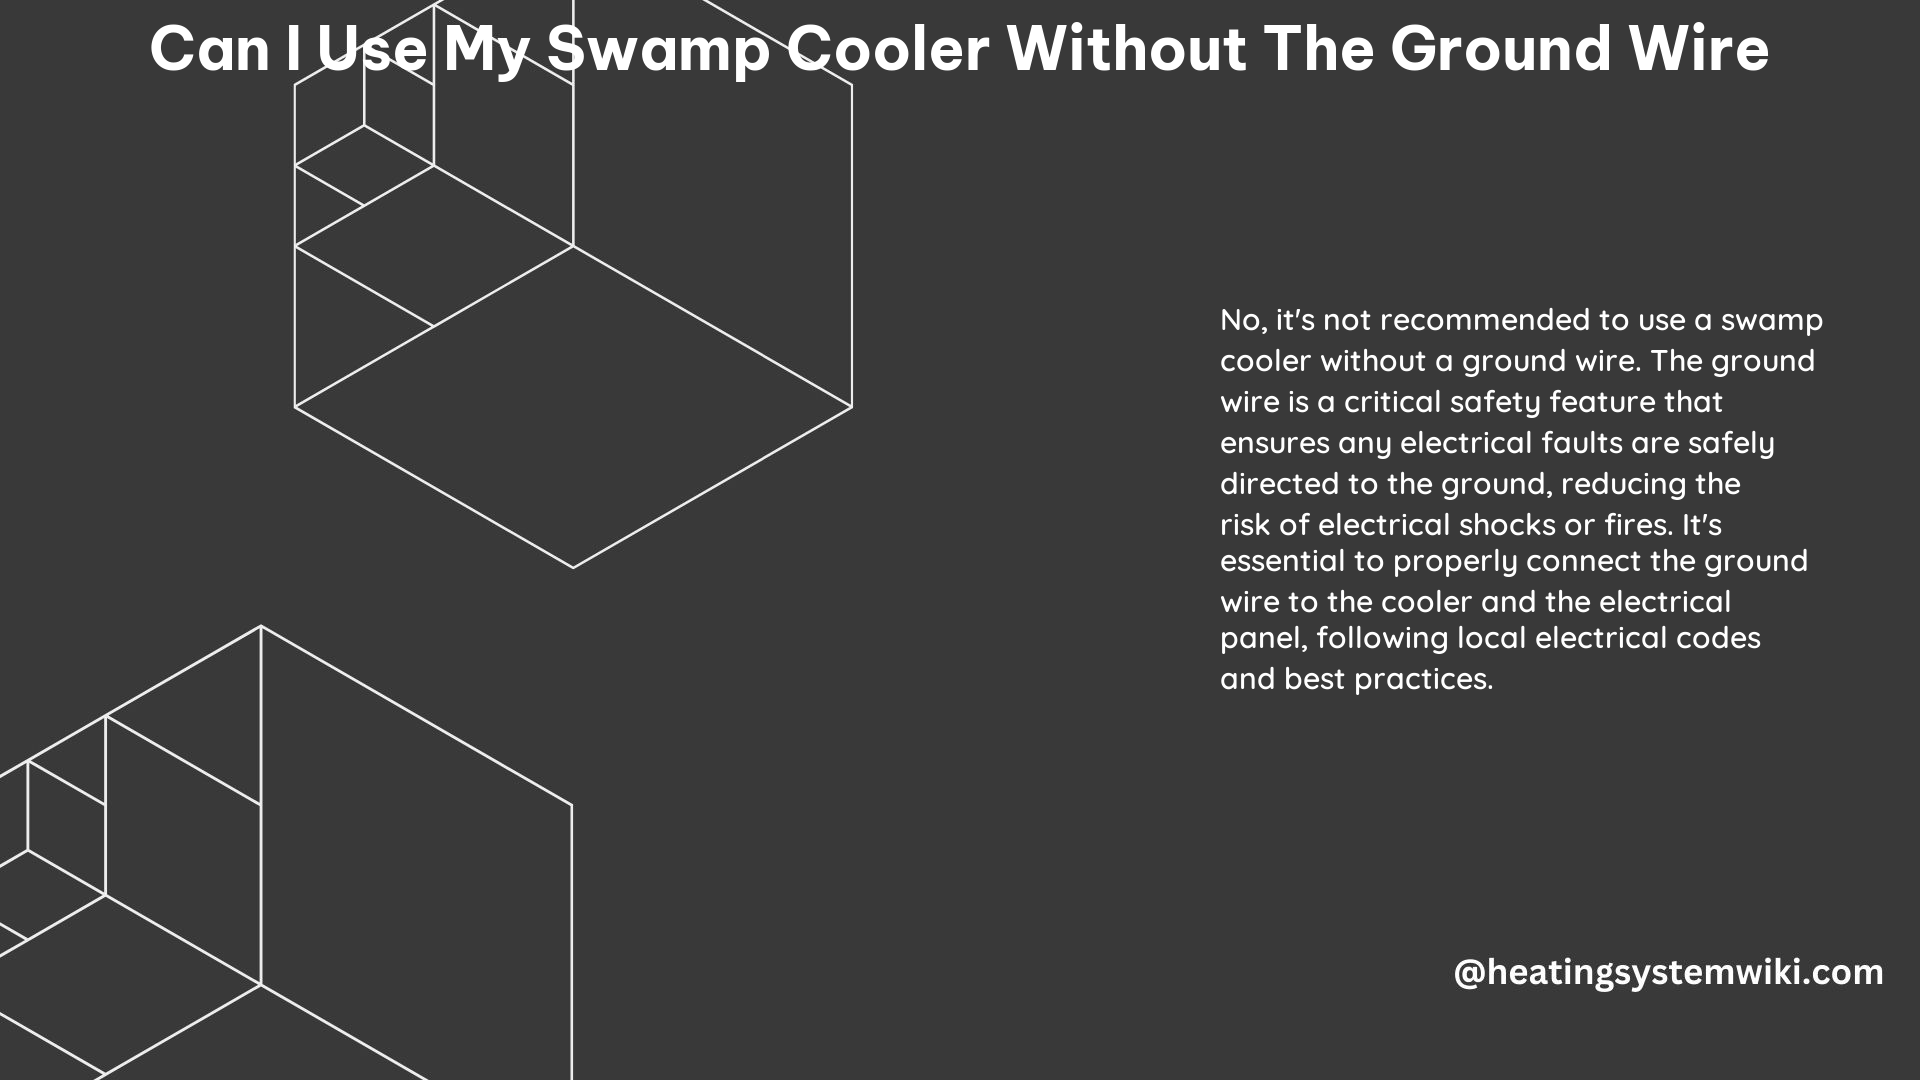 Can I Use My Swamp Cooler Without the Ground Wire